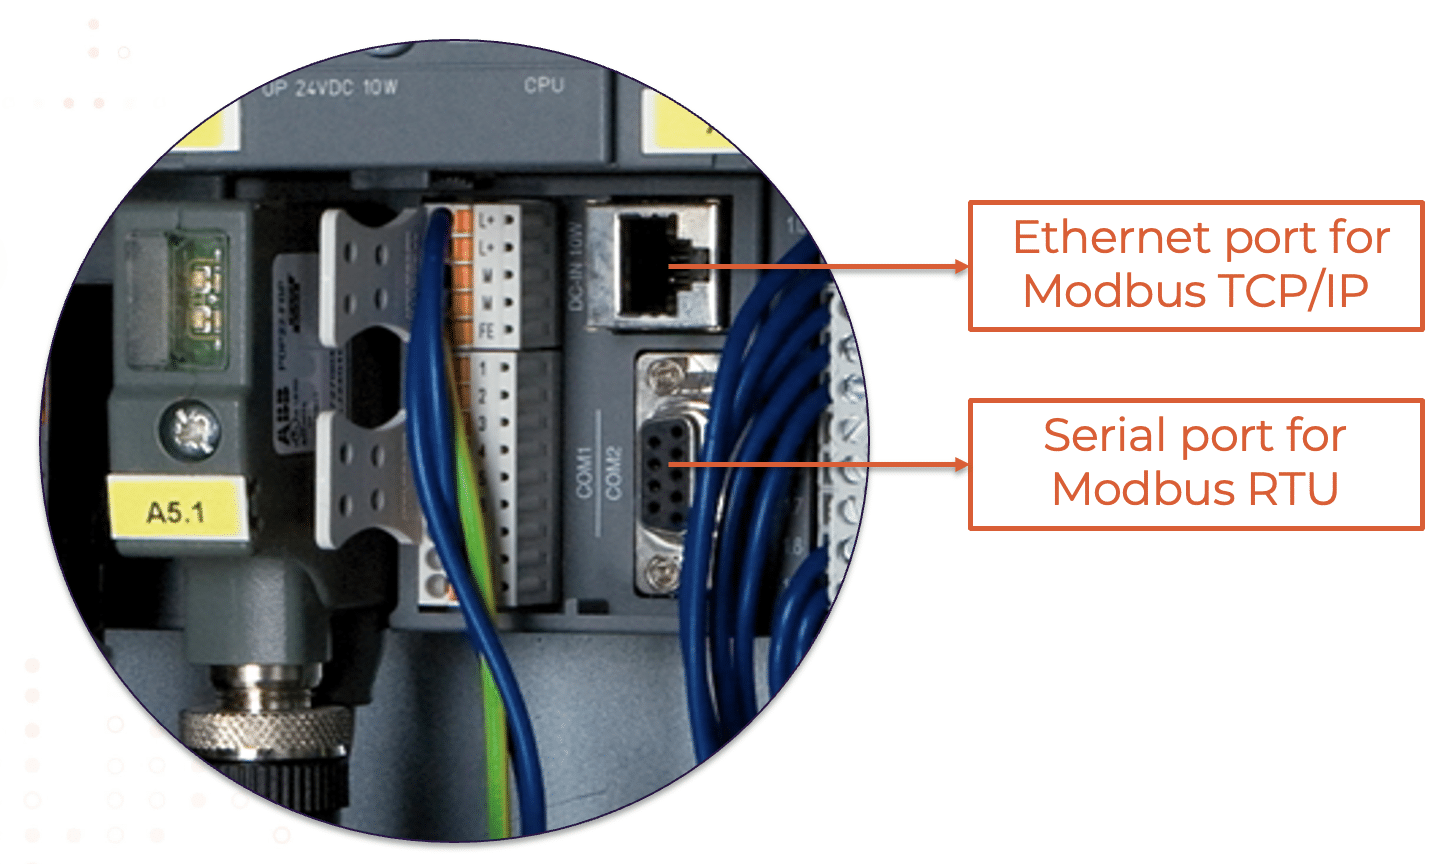 Image shows how Machine data can be collected via Modbus PLC connection in the factories.